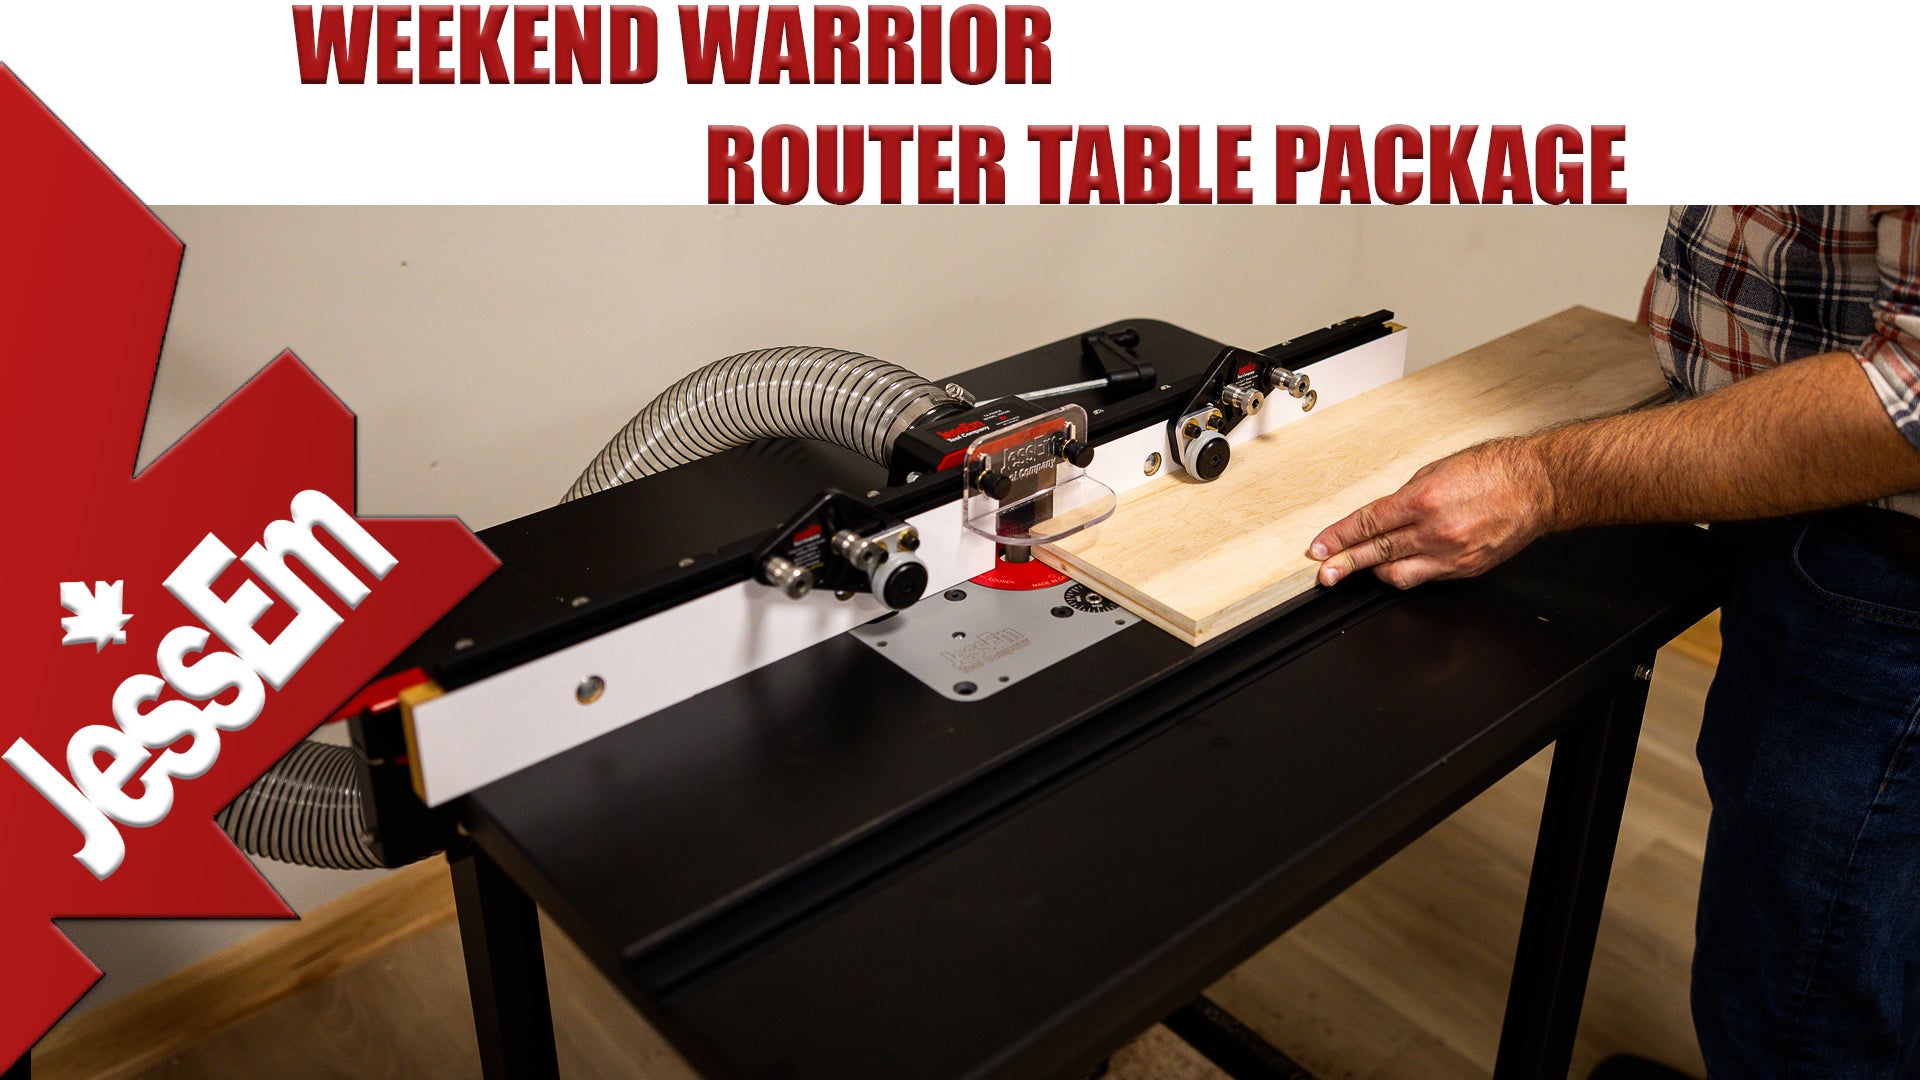 Load video: Weekend Warrior Router Table Package Video